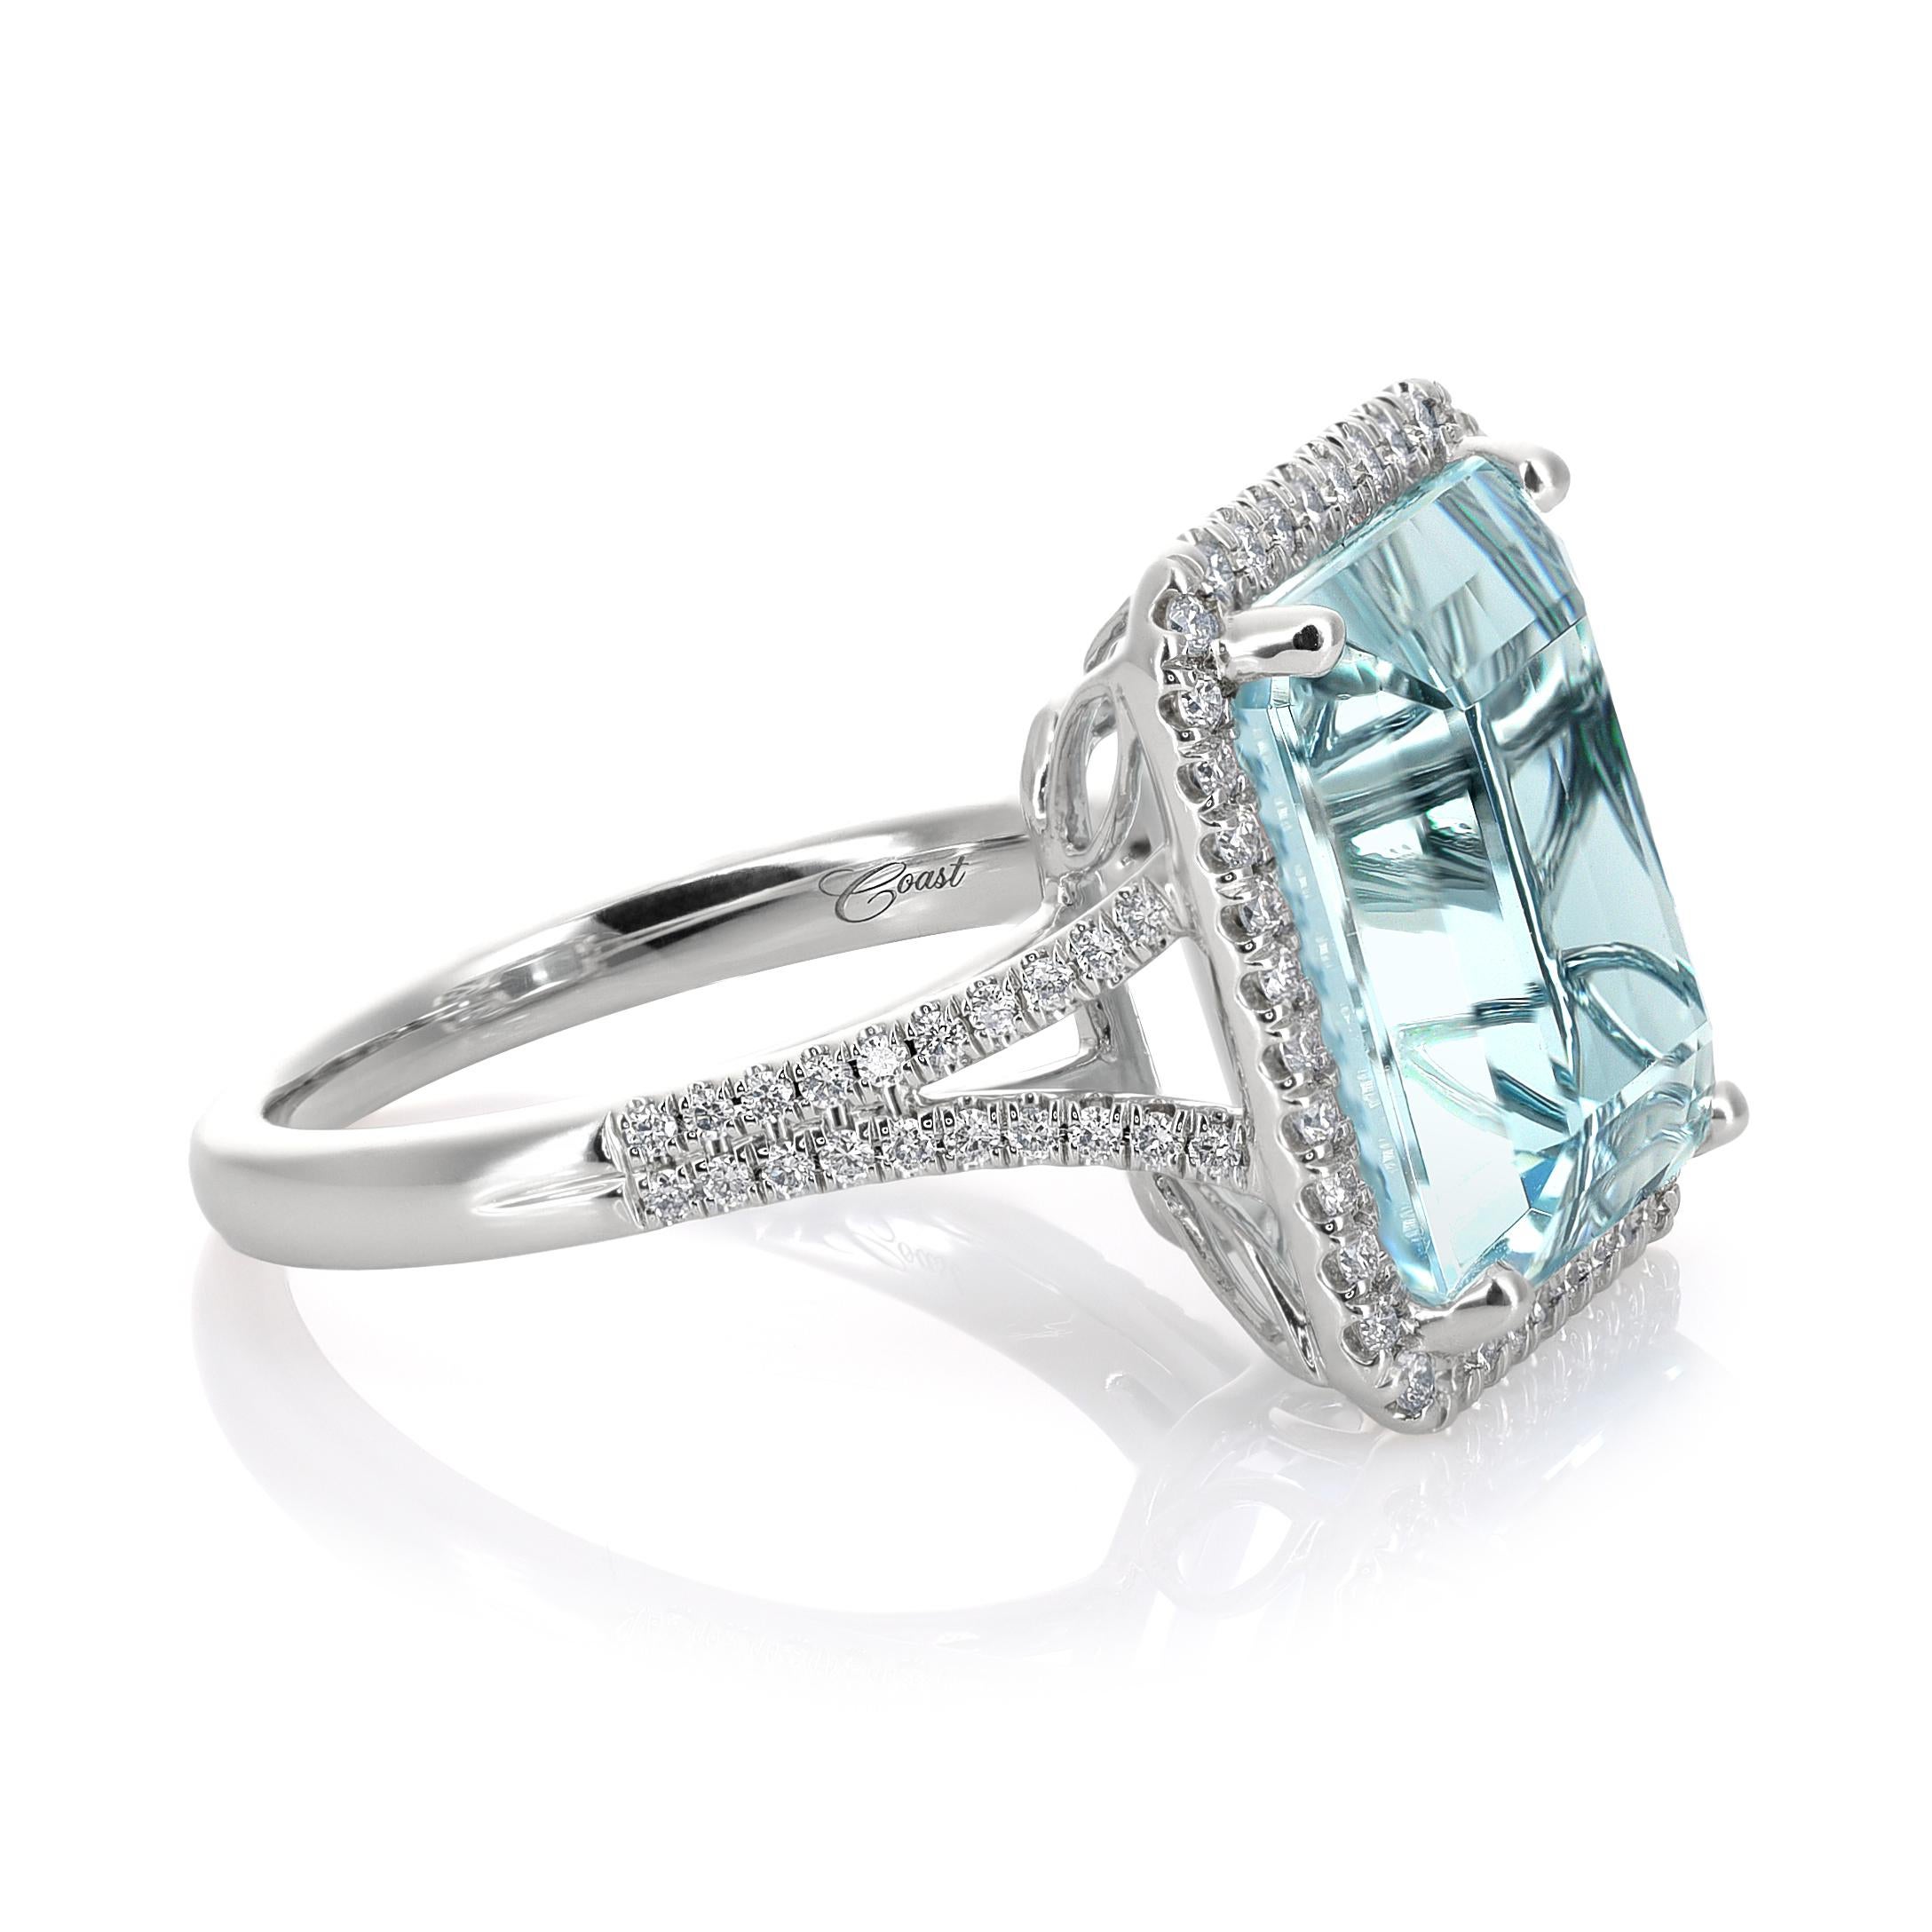 This stunning 14KW gold ring showcases a natural aquamarine gemstone, princess cut and weighing 9.45 carats. The aquamarine has undergone a heating process to enhance its color. The ring setting also includes 0.38 carats of diamonds, adding a touch